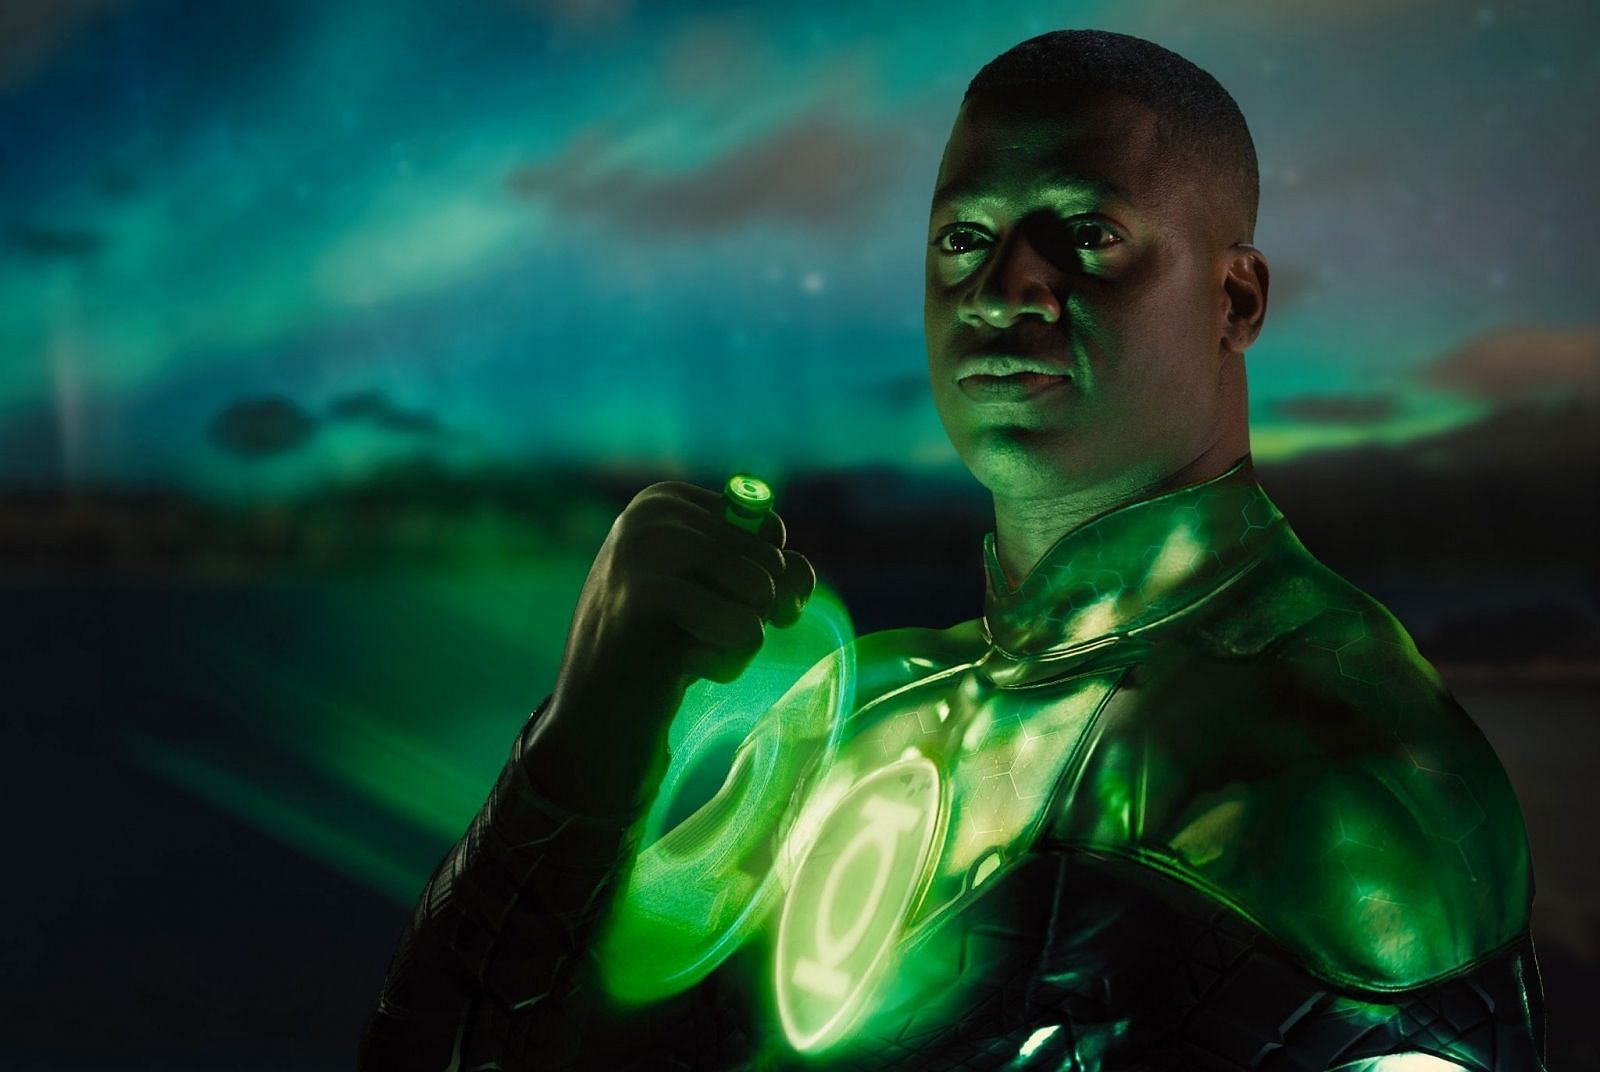 The intergalactic peacekeeper possesses a power ring that can create anything he imagines, limited only by his willpower (Image via DC Studios)